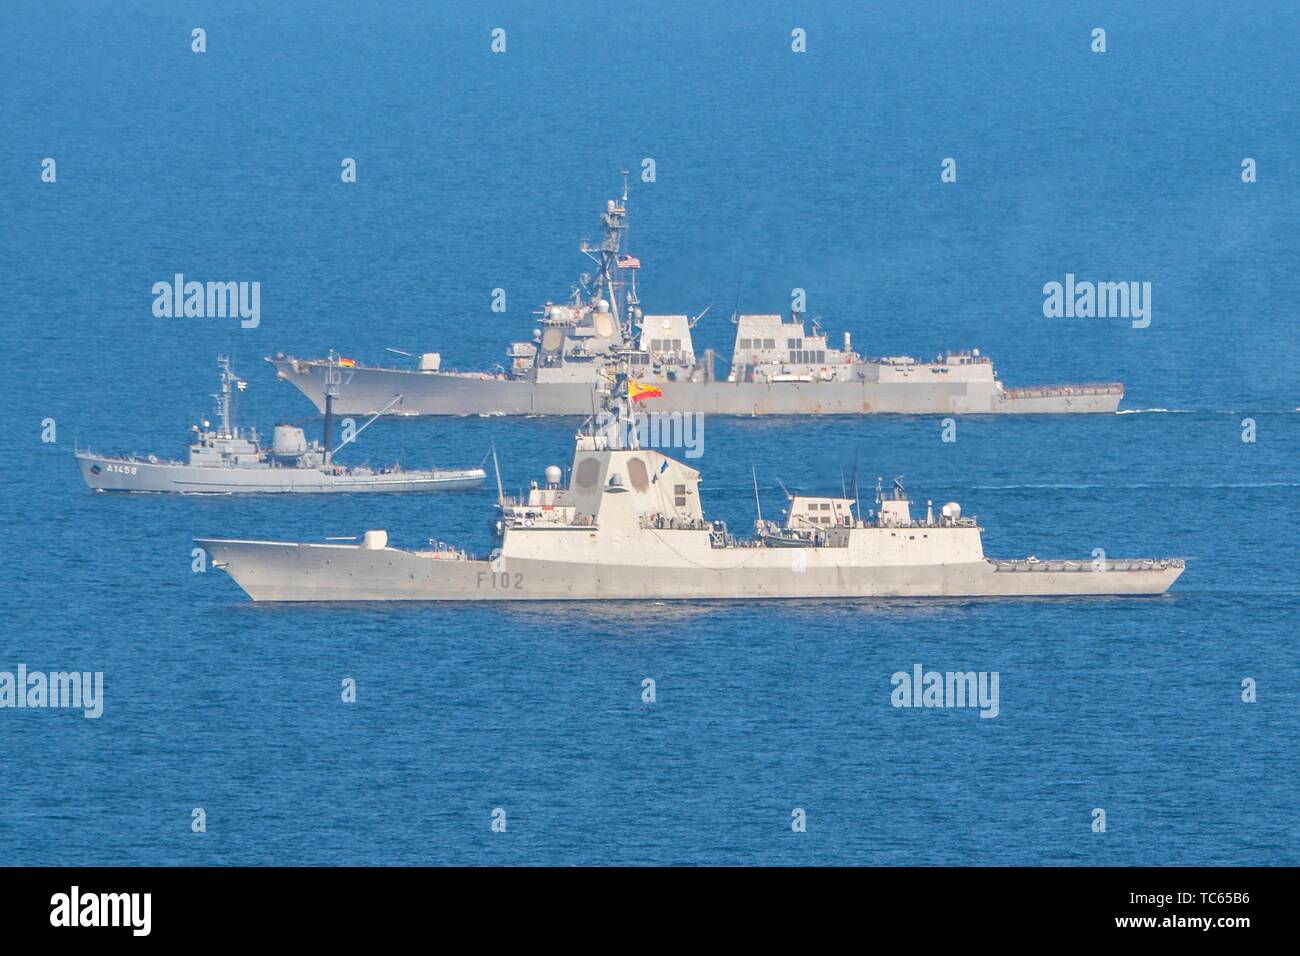 U.S. Navy sailors assigned to the Arleigh Burke-class guided-missile destroyer USS Gravely, back, sails in formation alongside the Spanish Naval ship frigate Almirante Juan de Borbon, front, and the German Navy tug DRL Fehmarn during a NATO exercise May 30, 2019 in the  Baltic Sea. Stock Photo